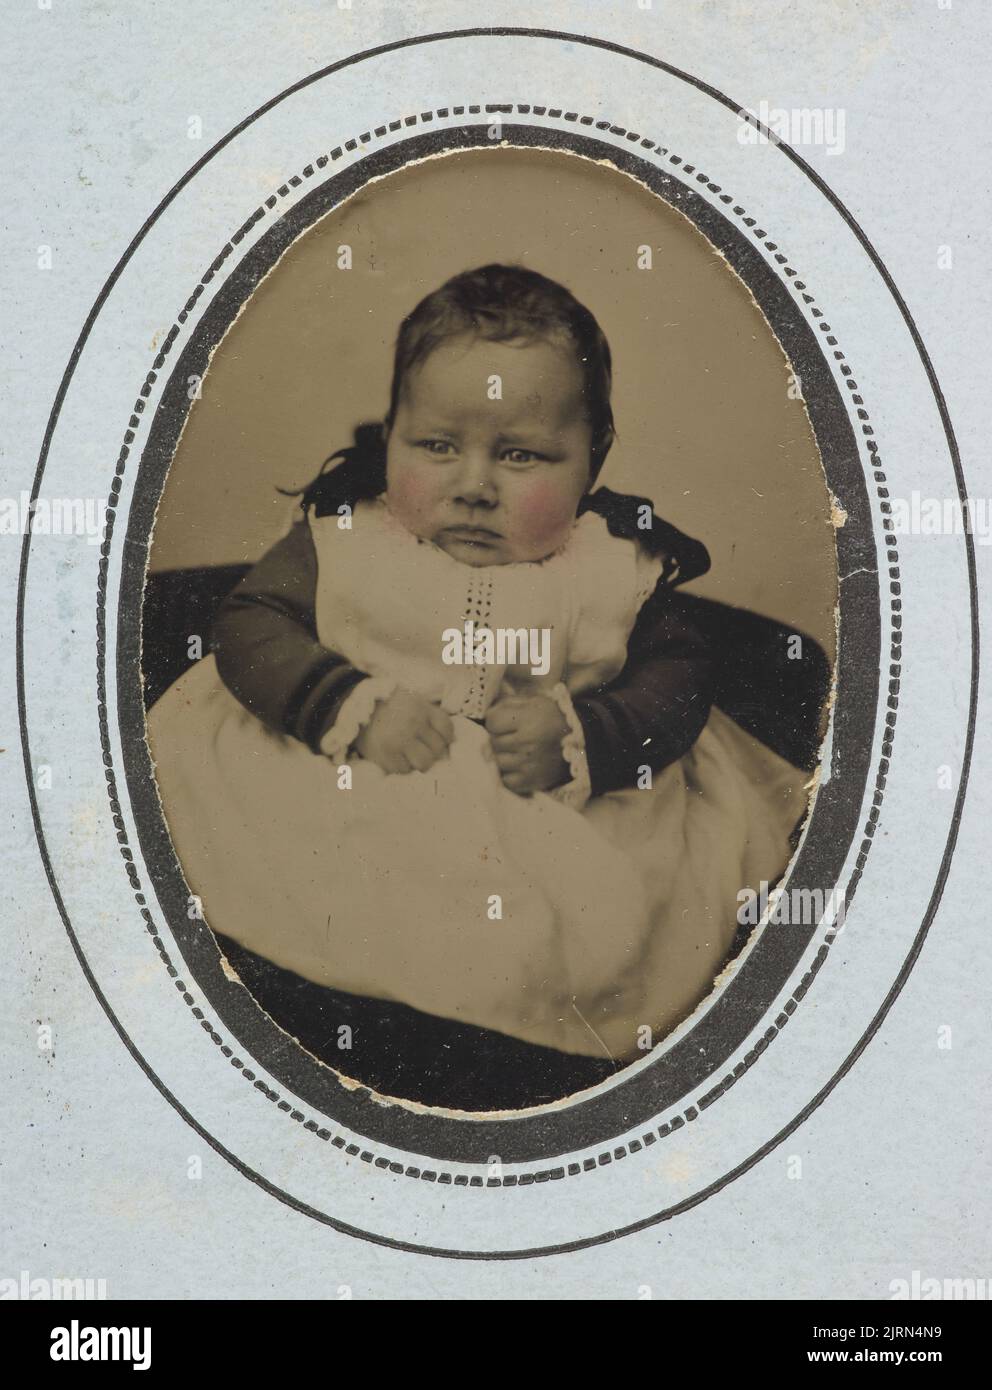 Portrait of a baby, 1860s-1880s, maker unknown. Gift of Simon Knight, 2015. Stock Photo